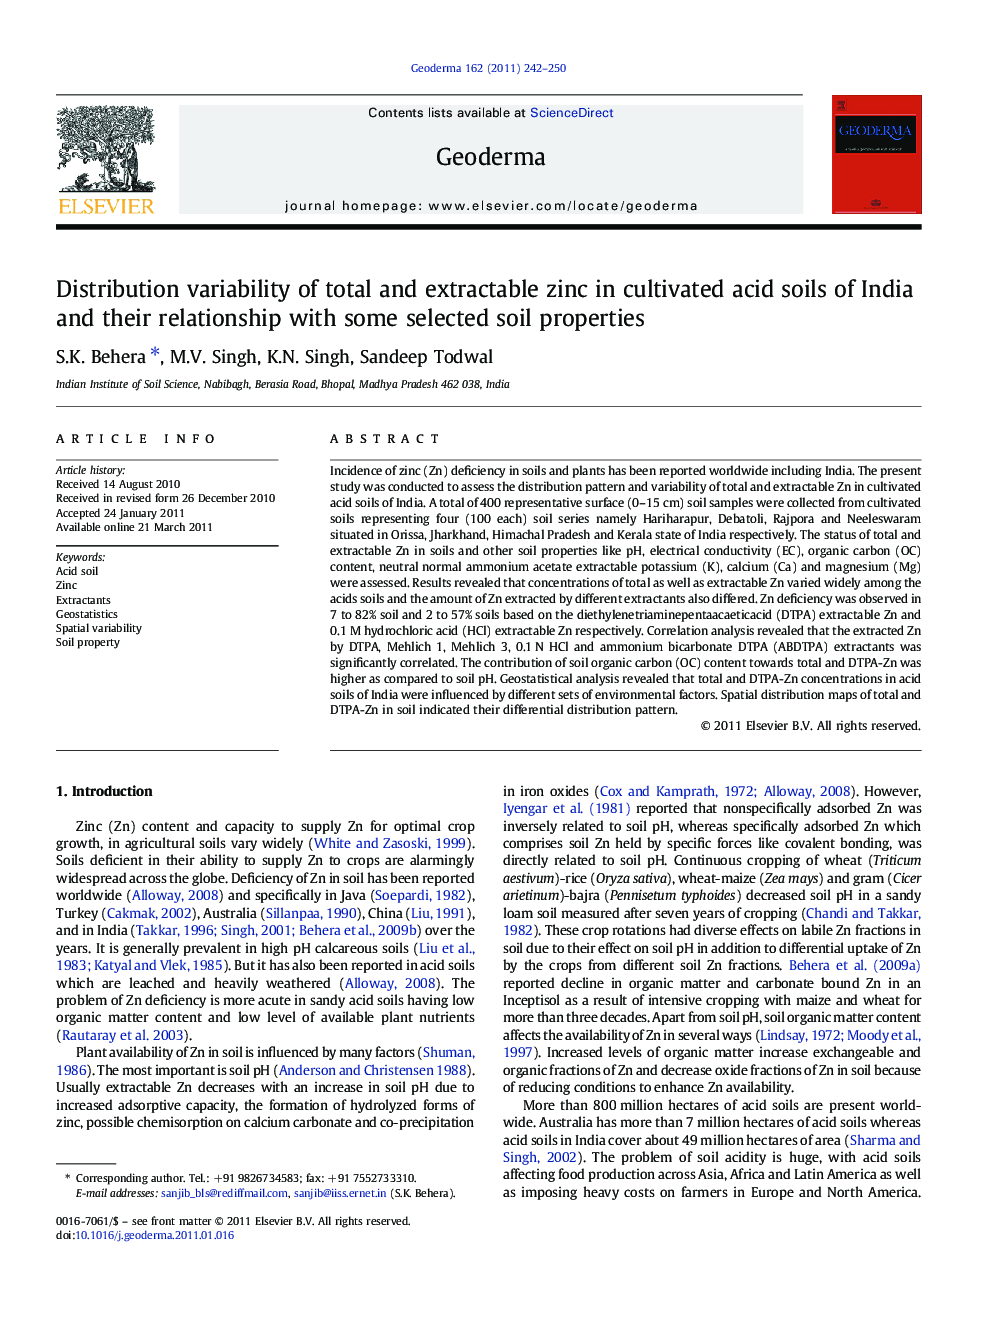 Distribution variability of total and extractable zinc in cultivated acid soils of India and their relationship with some selected soil properties